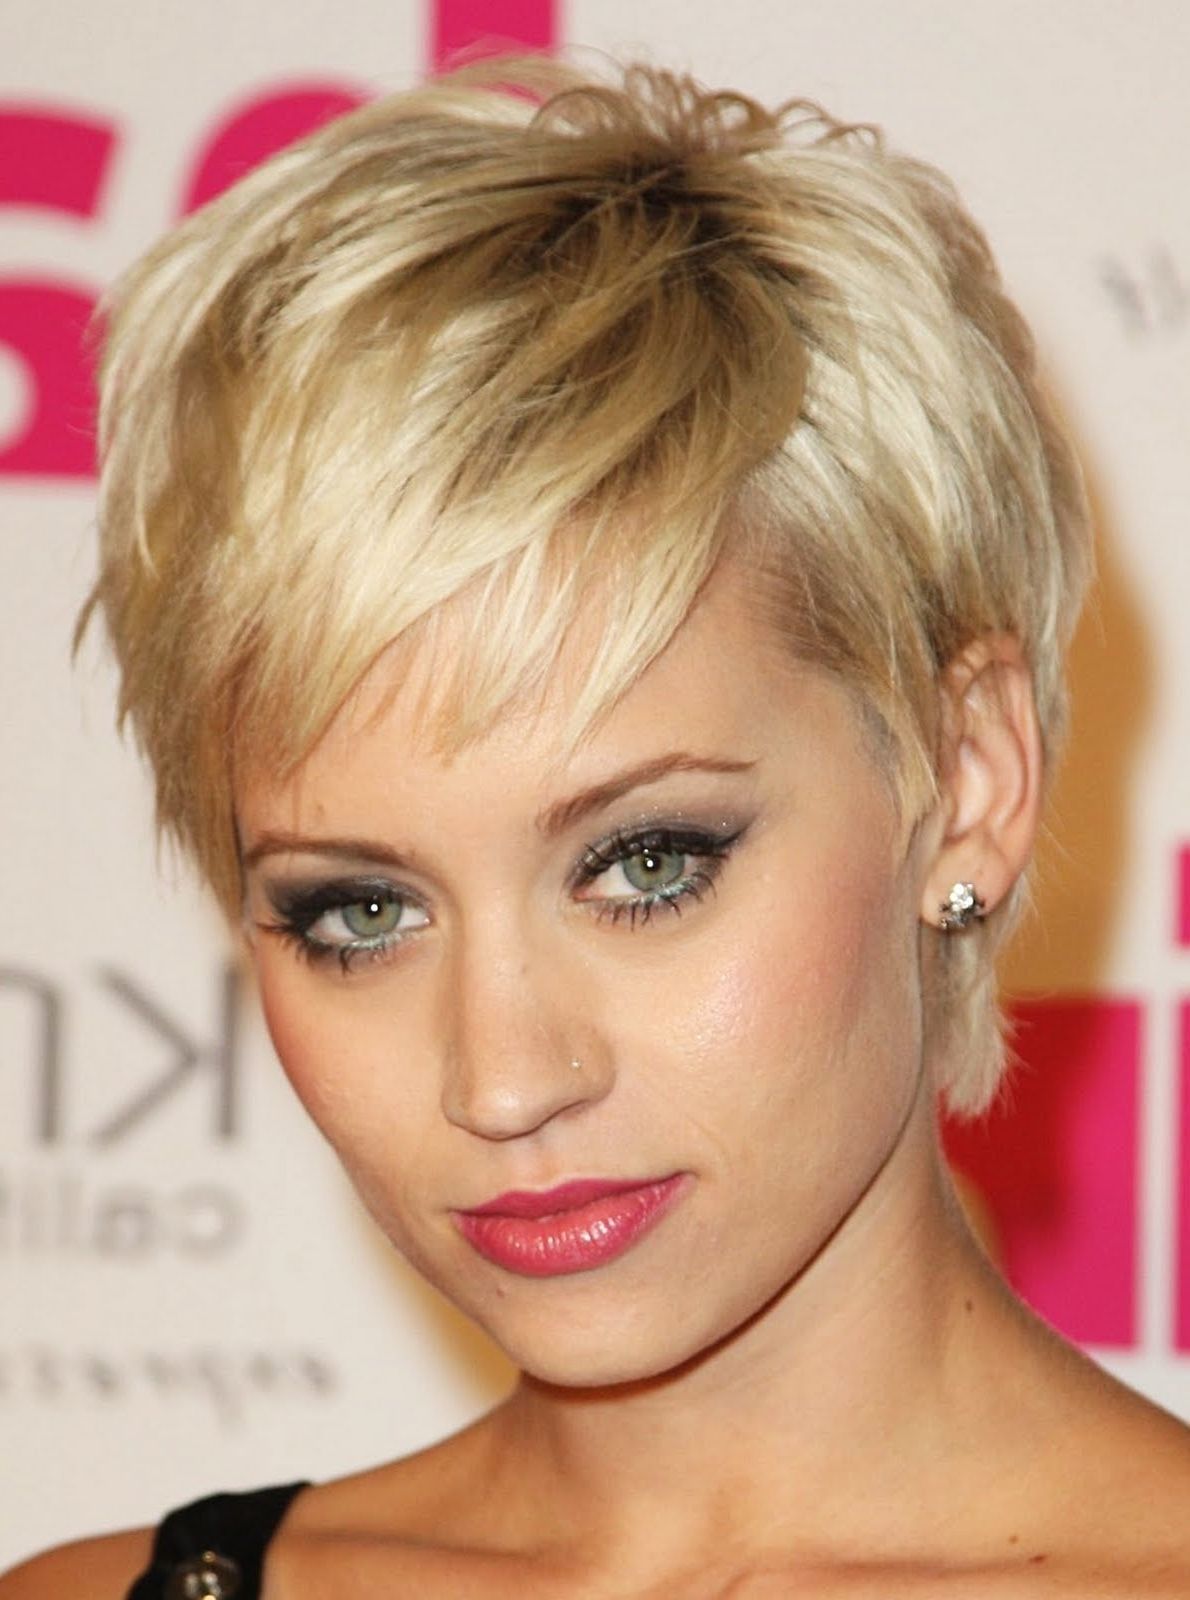 Short Hairstyles: 10 Top Ideas Short Hairstyles Thin Hair Pixie Throughout Newest Pixie Hairstyles For Long Face (View 2 of 15)